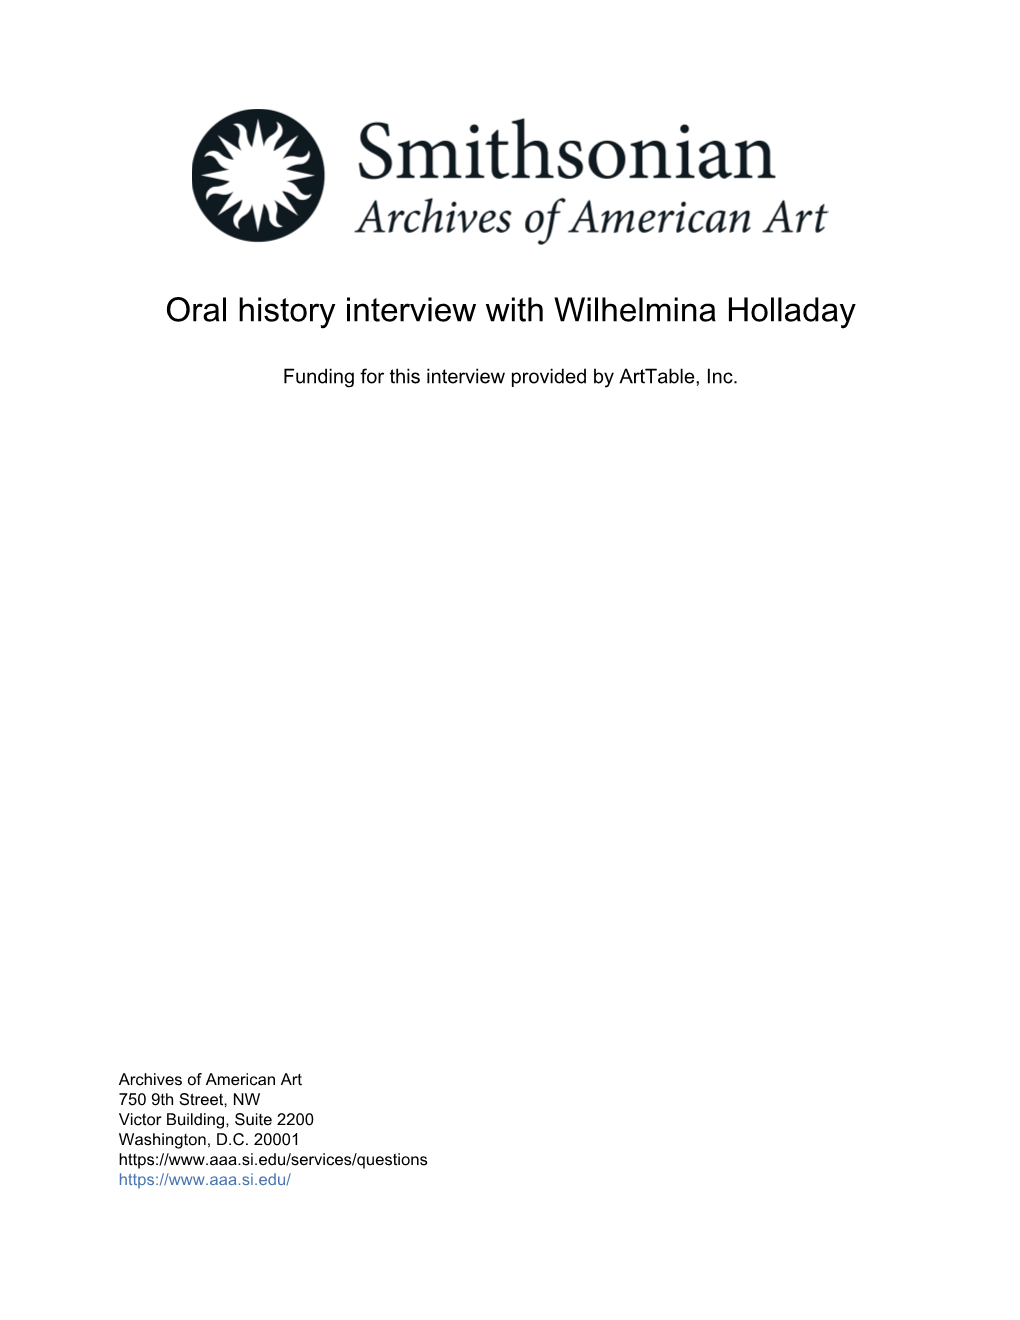 Oral History Interview with Wilhelmina Holladay